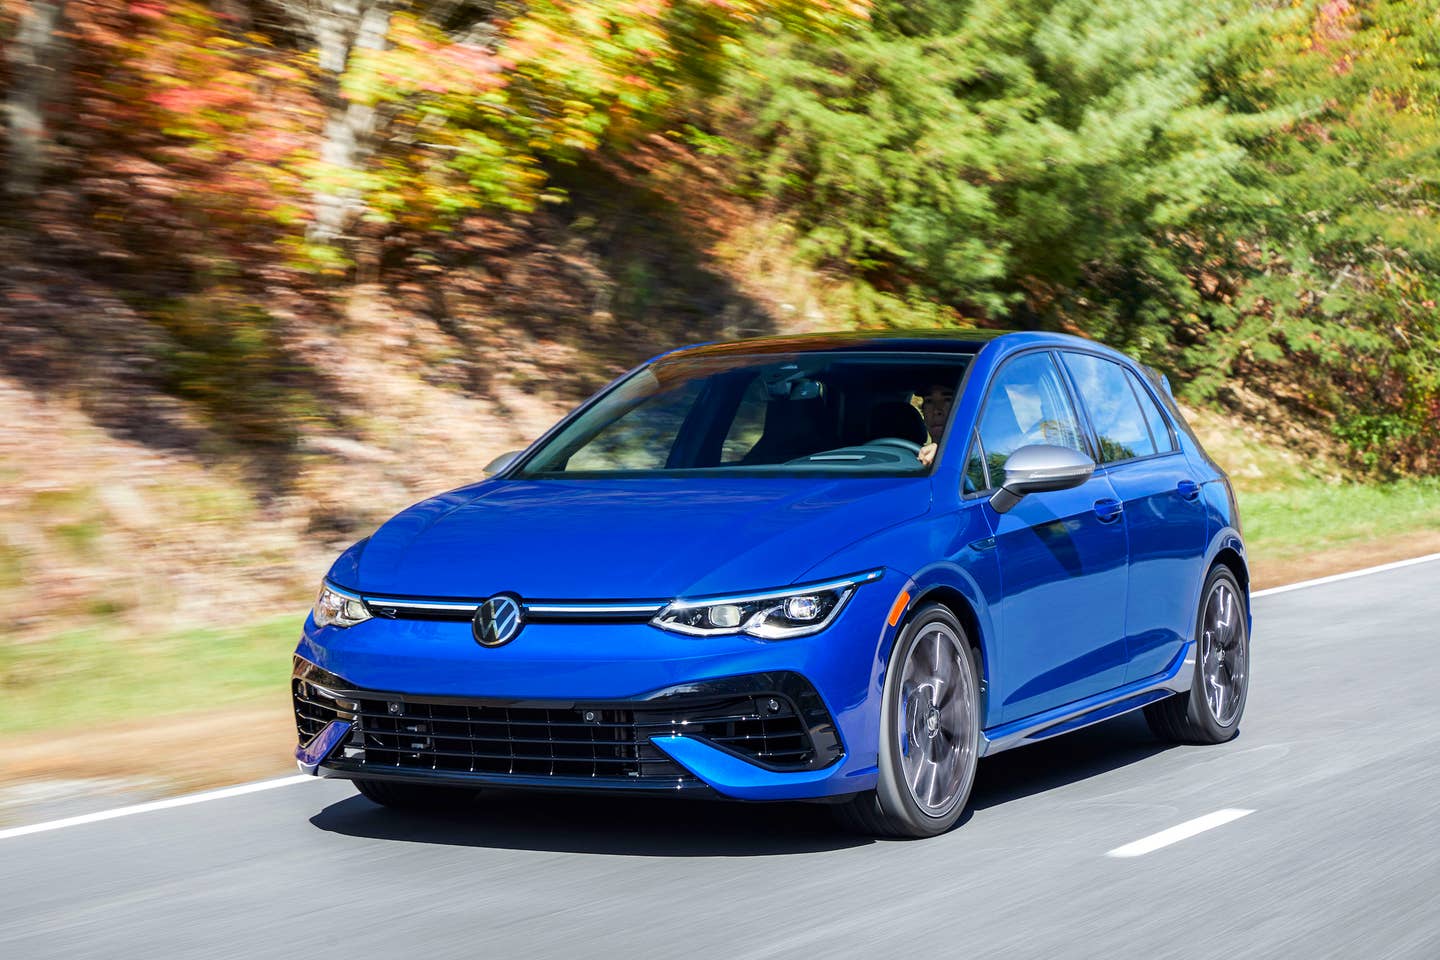 2022 Volkswagen Golf R First Drive Review: The Hot Hatch For Adults